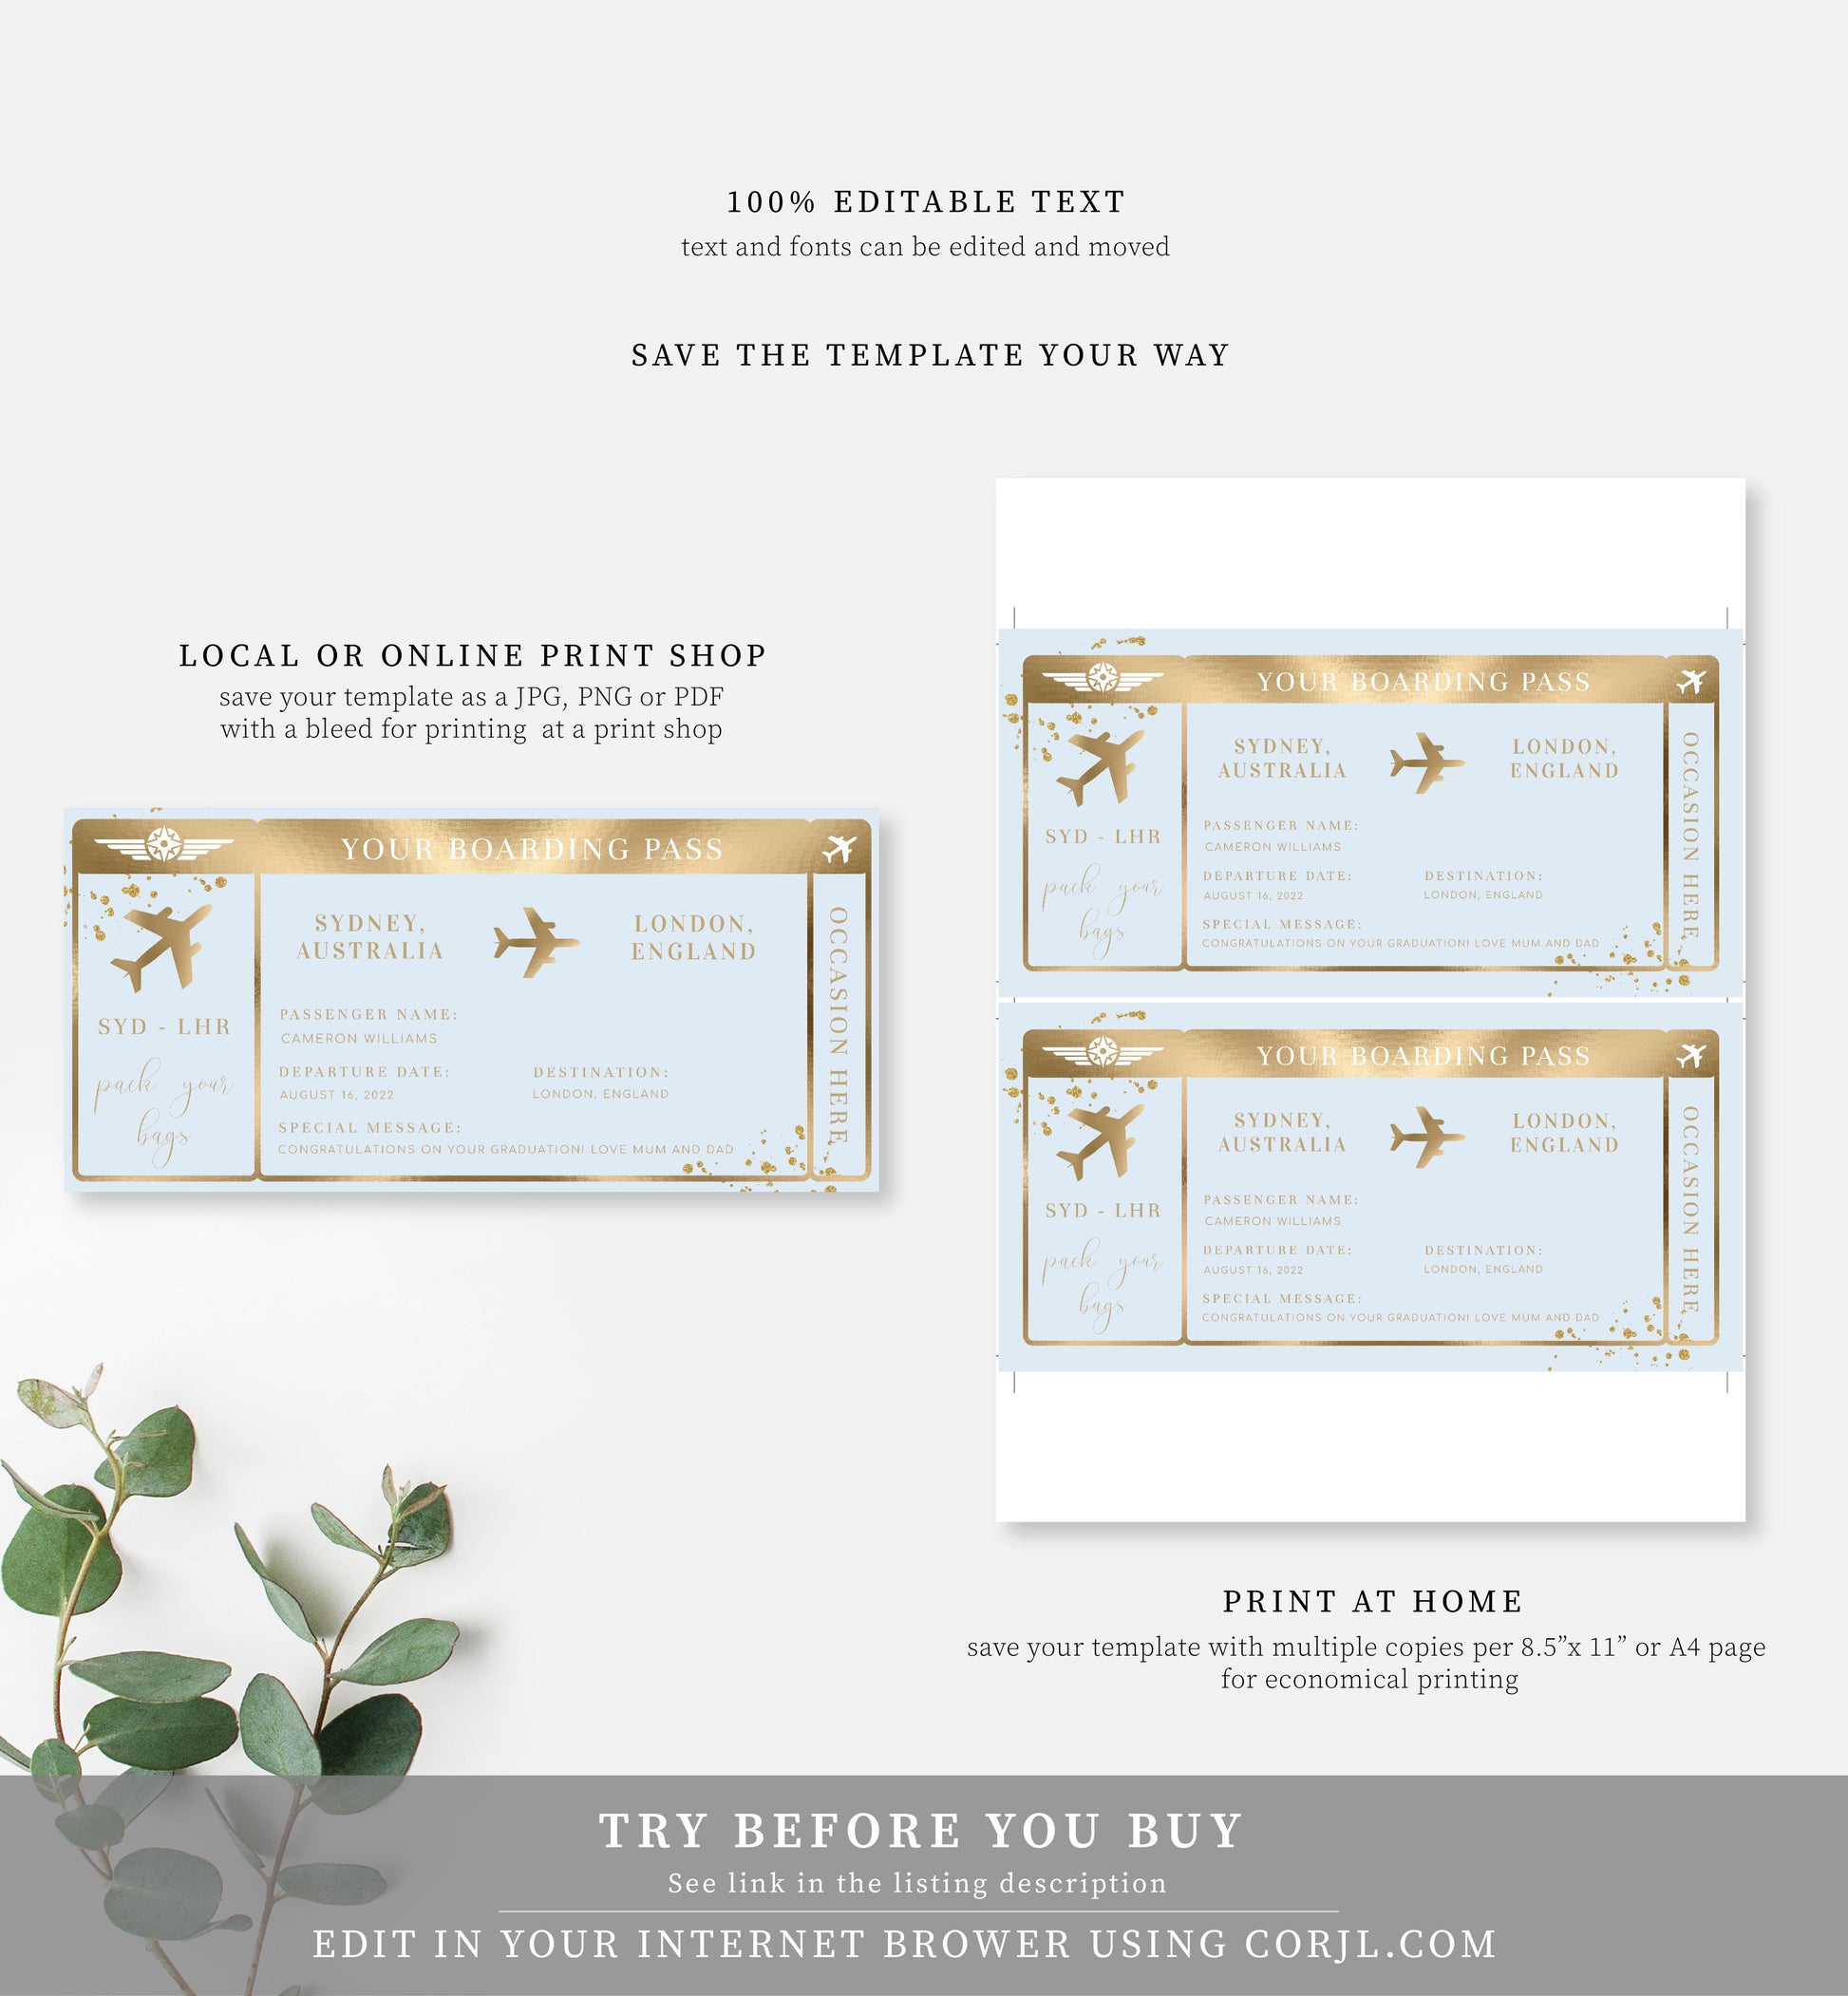 Paintly Blue | Printable Boarding Pass - Black Bow Studio